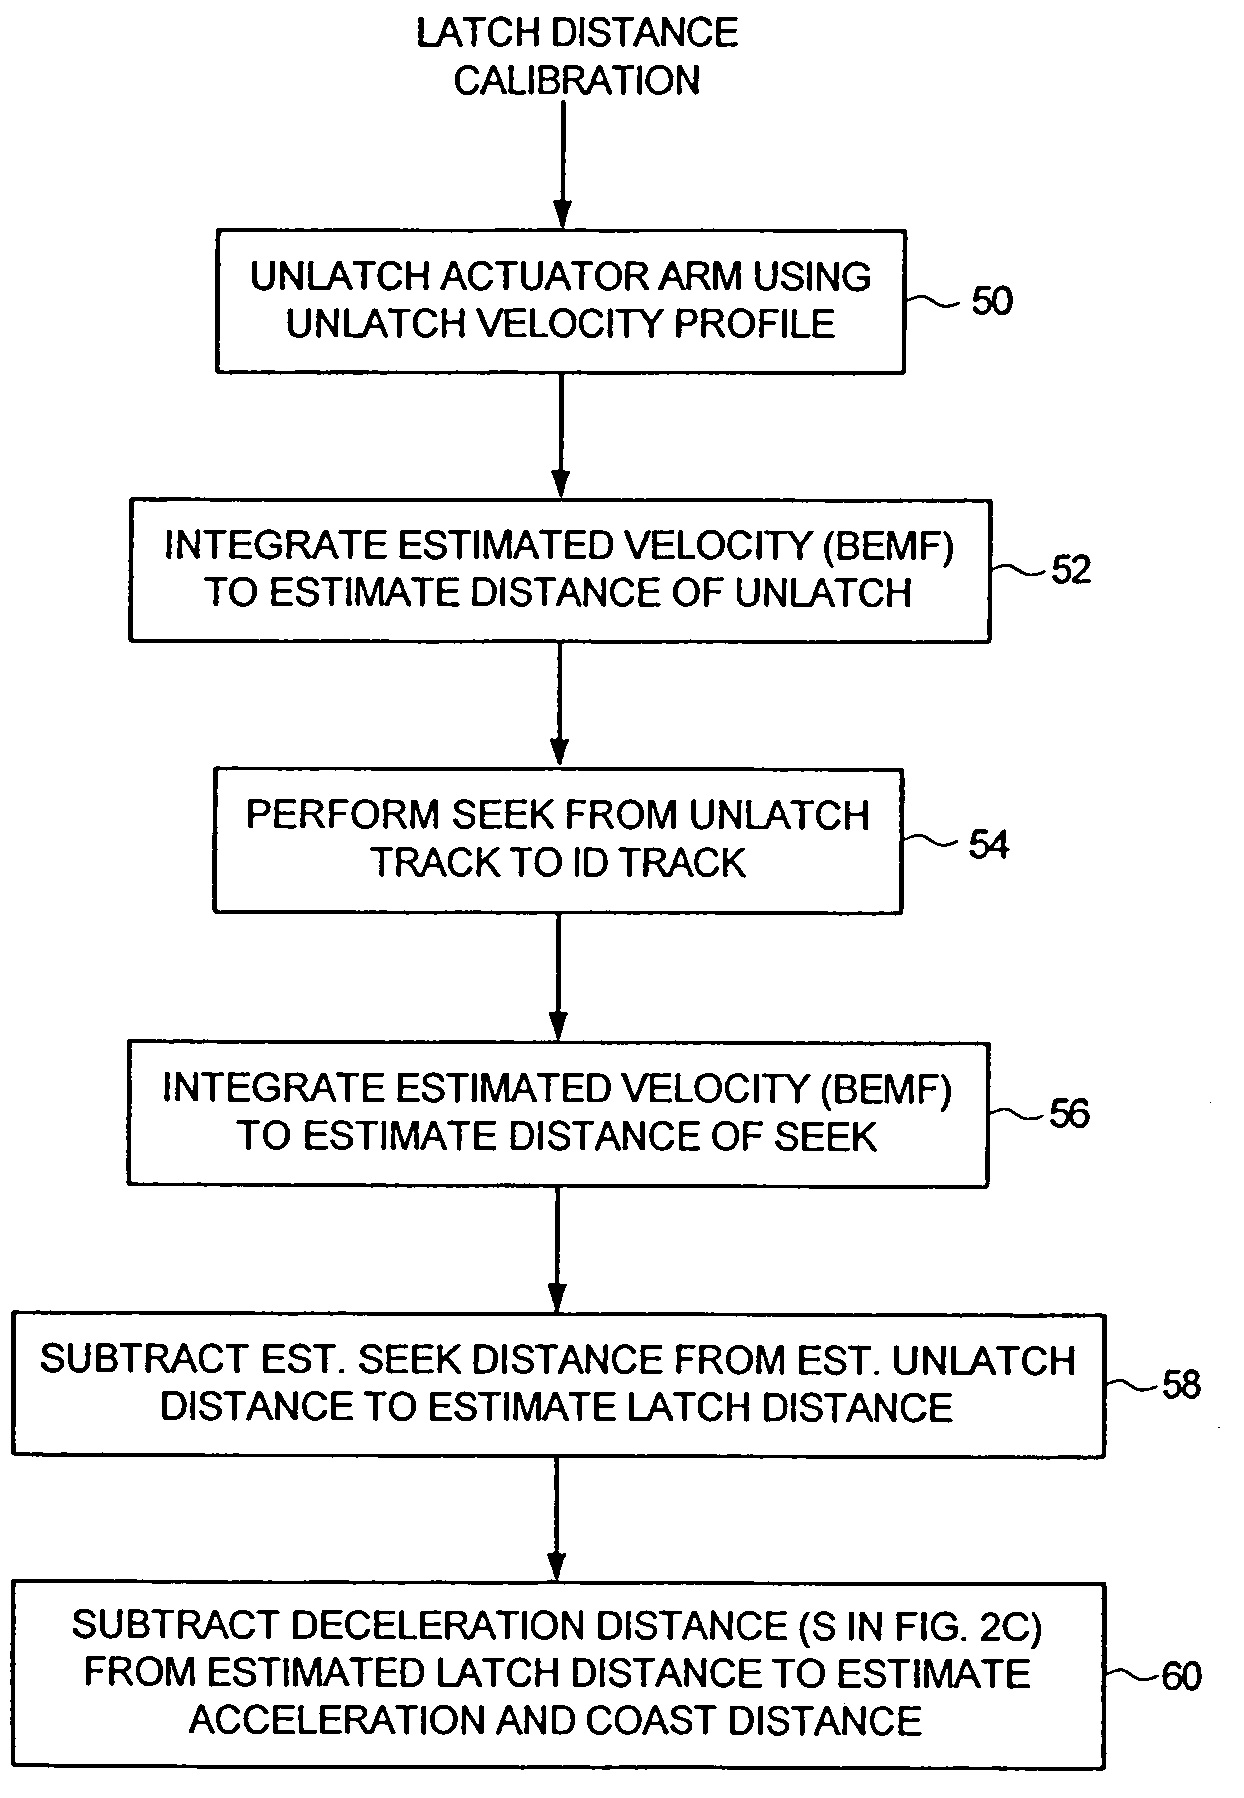 Disk drive employing a velocity profile and back EMF feedback to control a voice coil motor